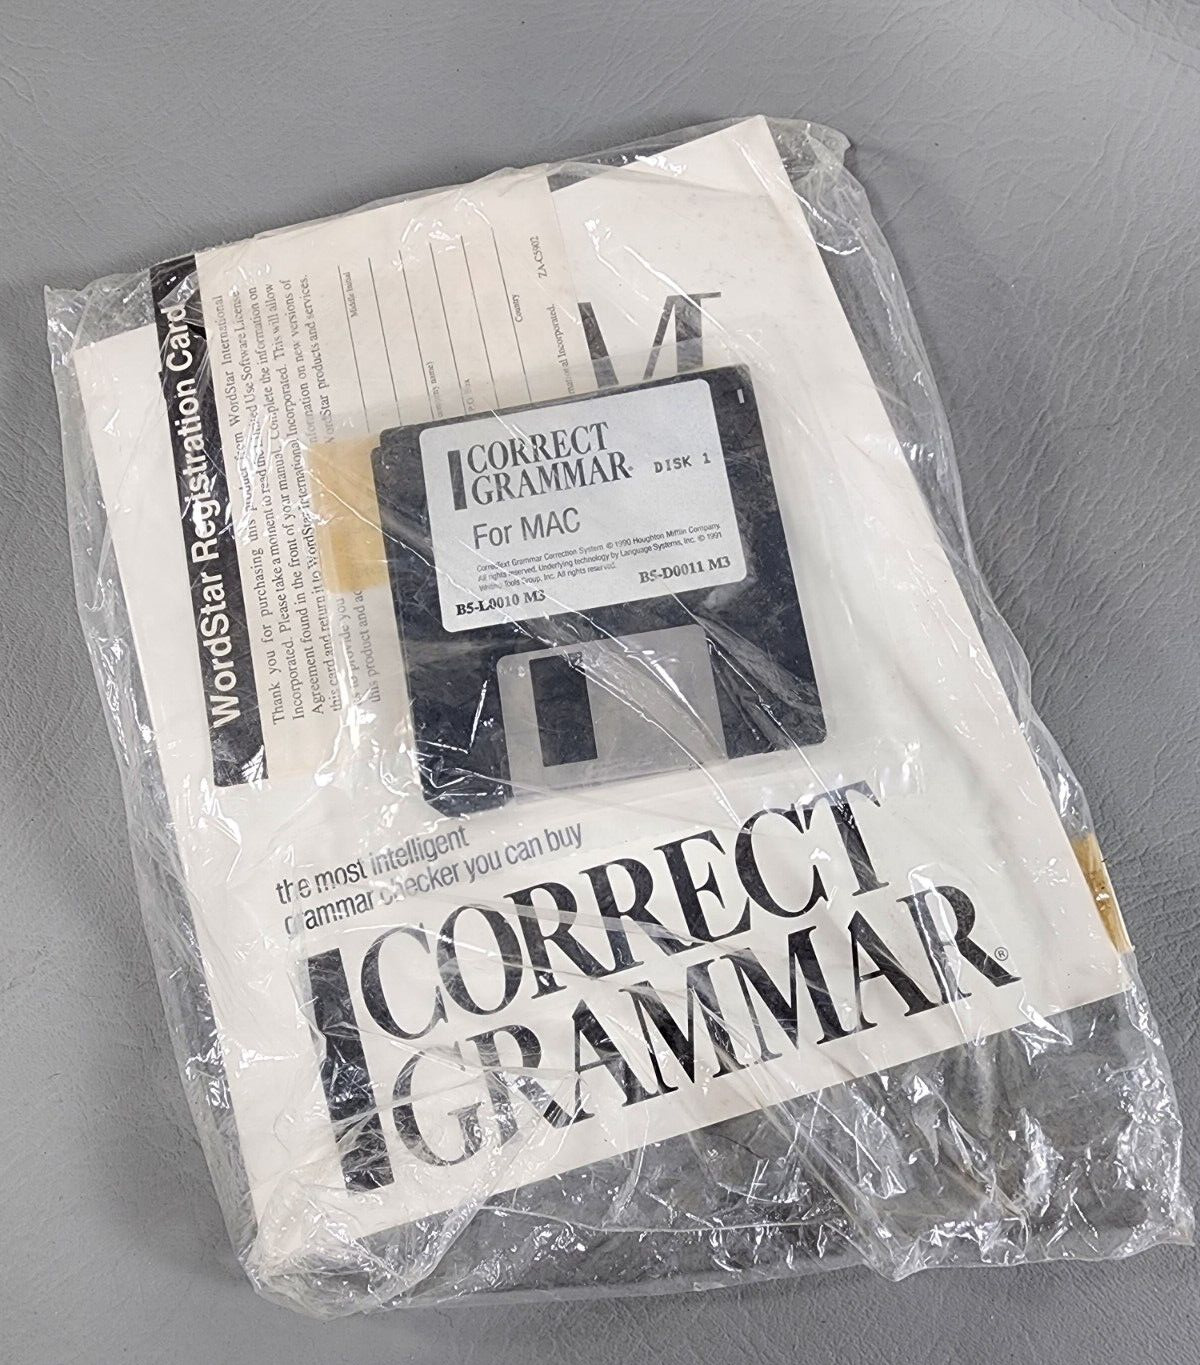 Correct Grammar for Mac - Manual & 3.5 - #B5-39000 - Vintage - New Old Stock